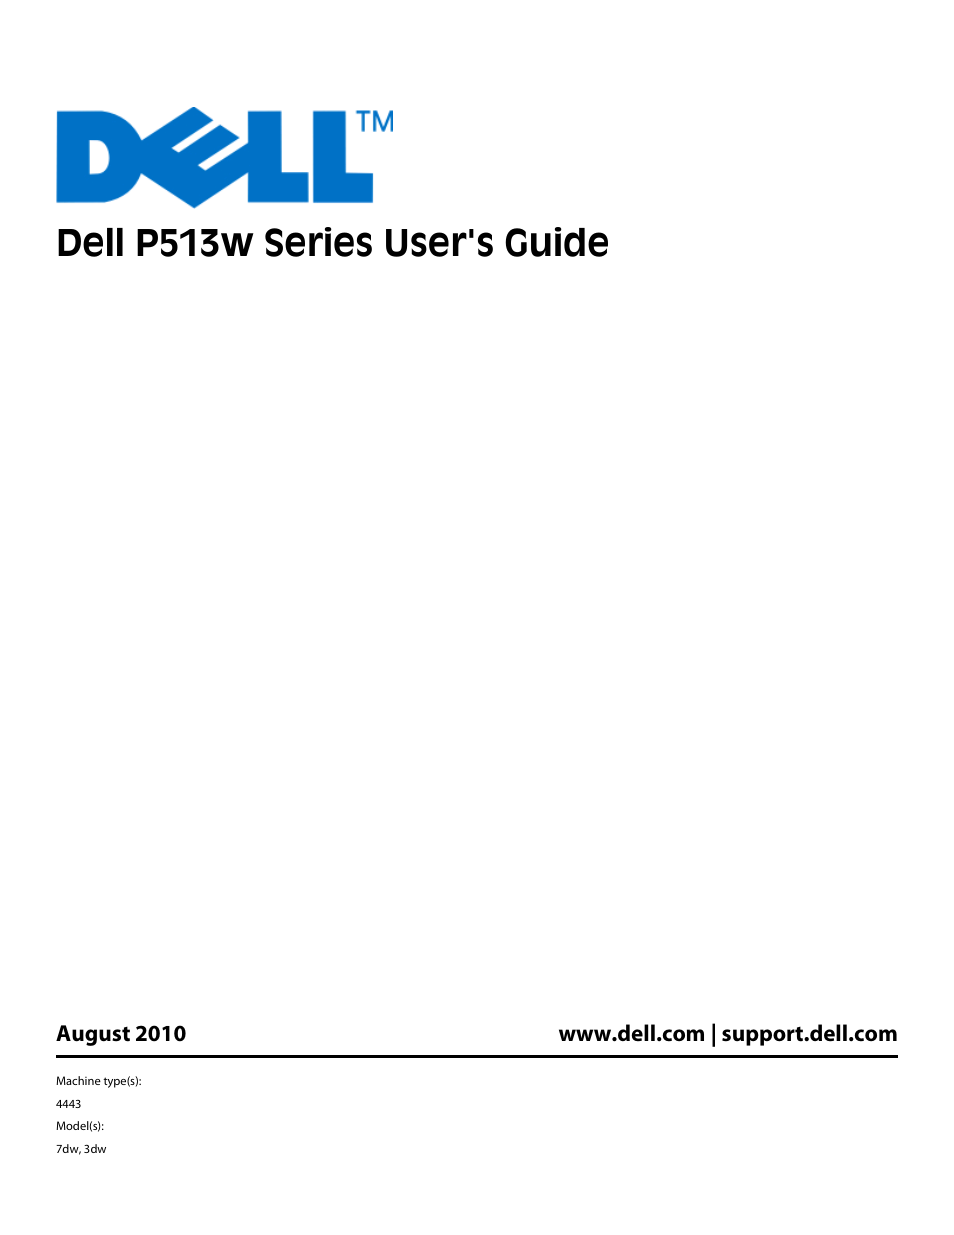 Dell P513w All In One Photo Printer User Manual | 134 pages